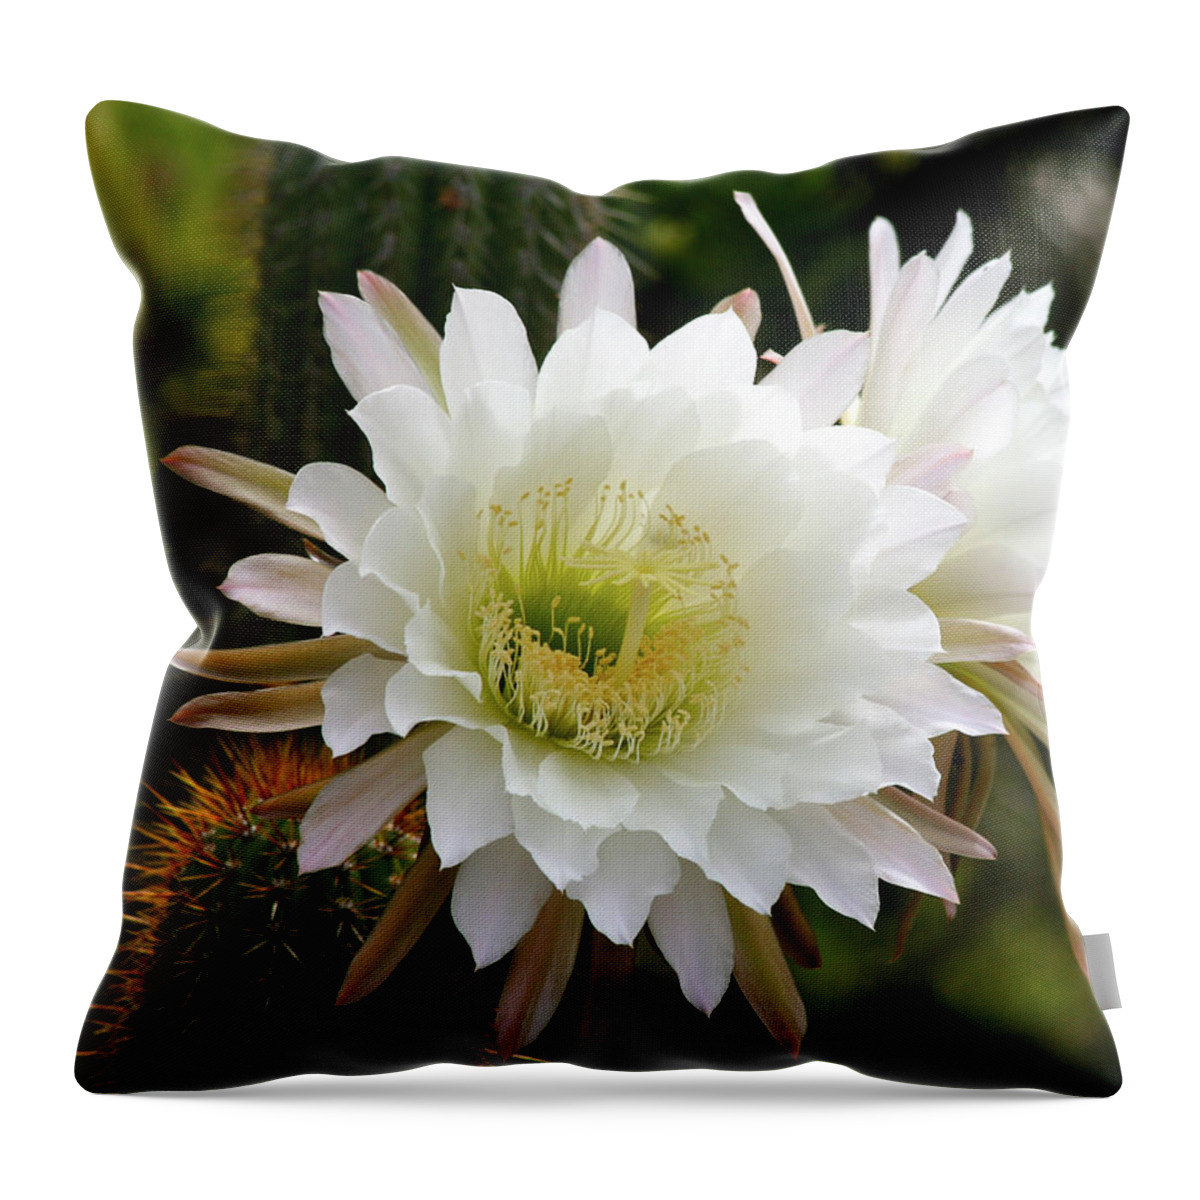 Cactus Throw Pillow featuring the photograph Cactus Blossoms by Melanie Alexandra Price